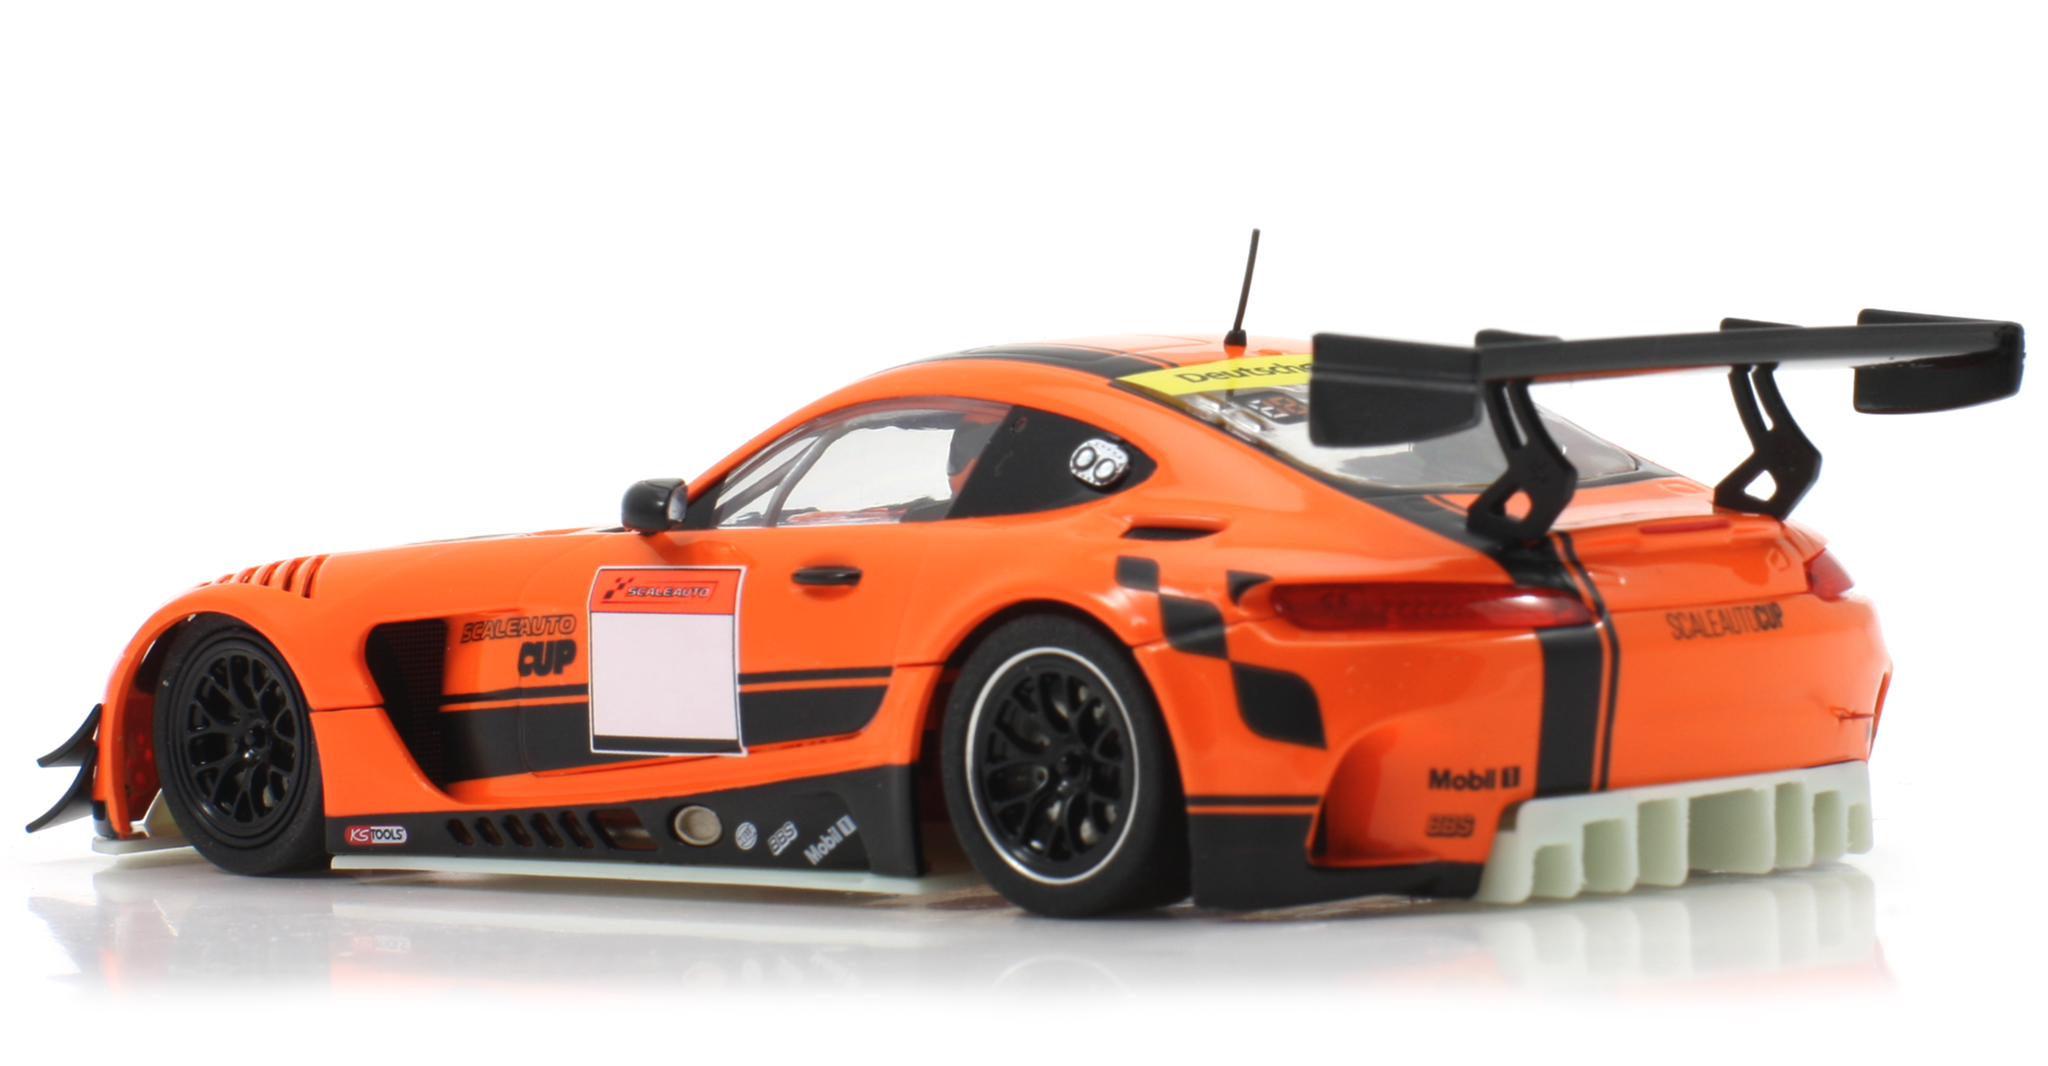 Scale 1/32 Scaleauto Building Kit of Analog Slotcar: MB-A GT3, Anglewinder In-Flex Chasis